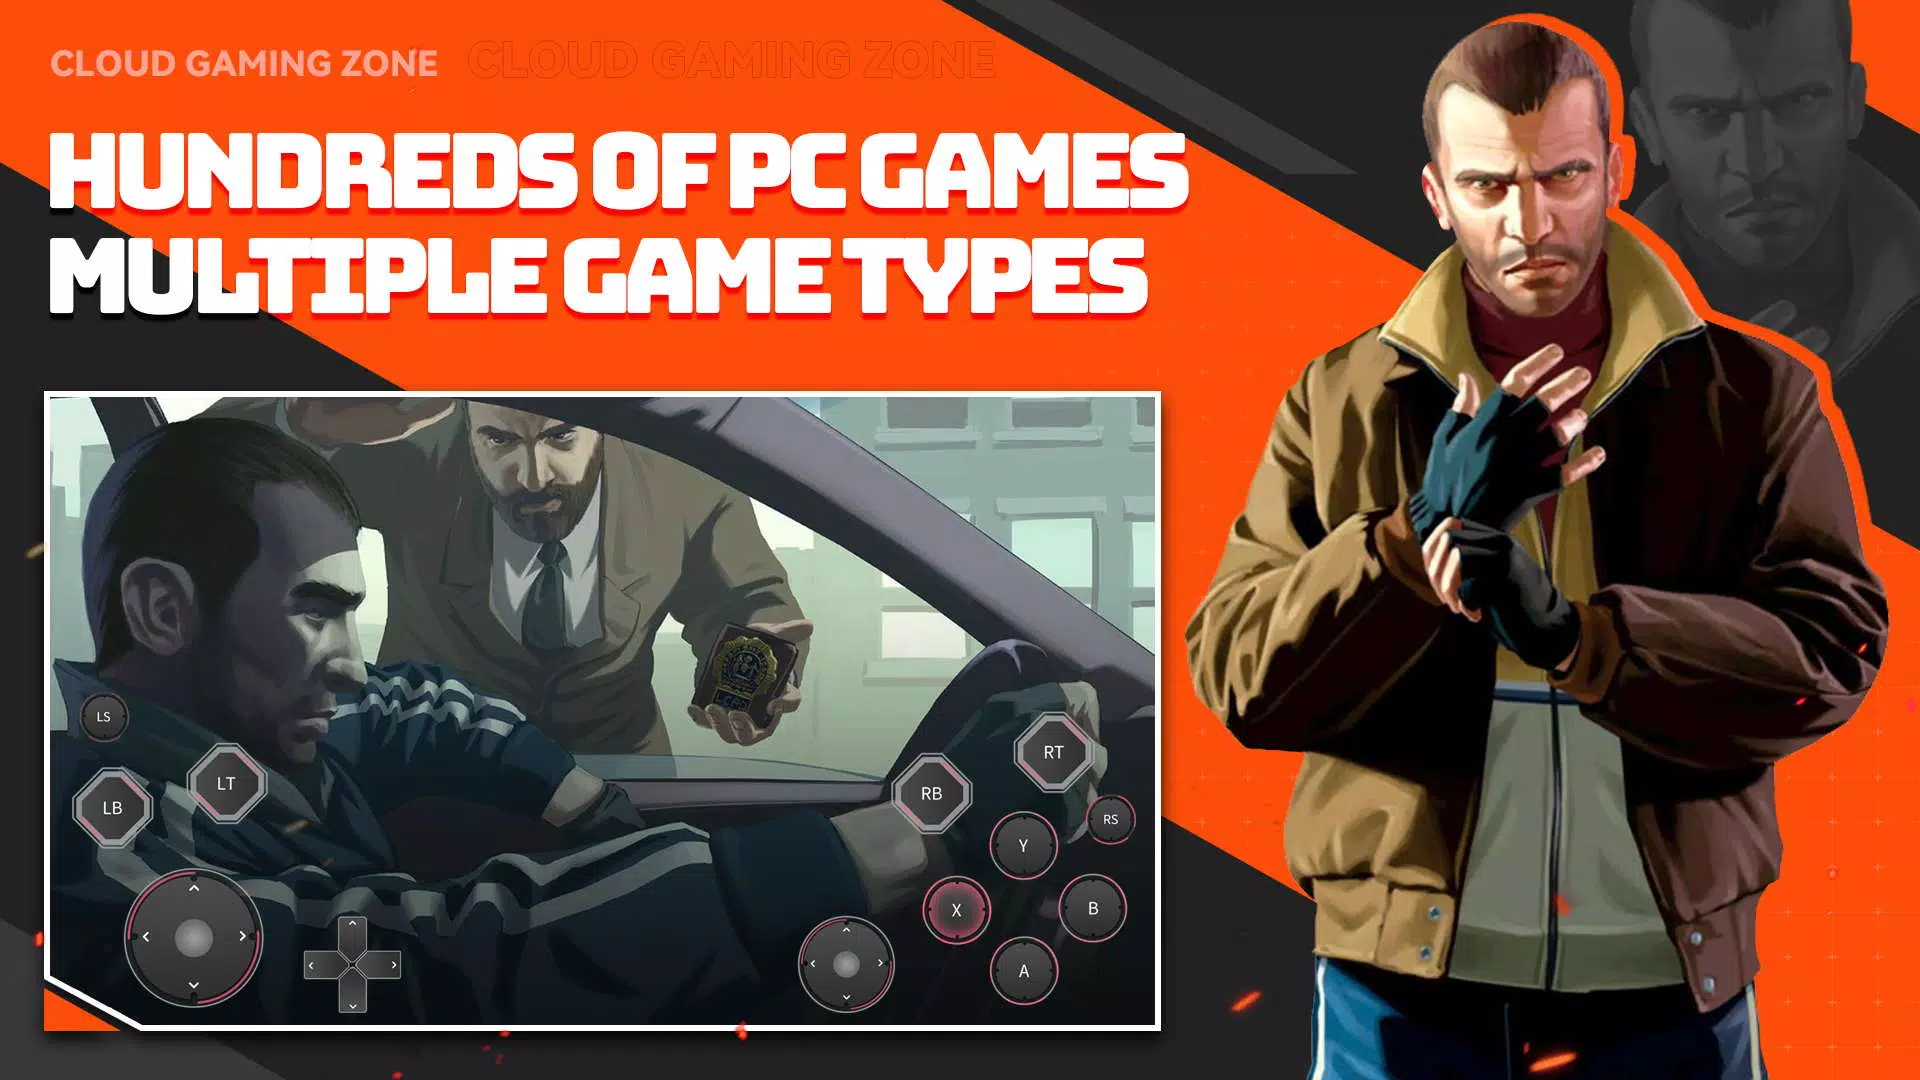 Player - PC Games on Android APK for Android Download